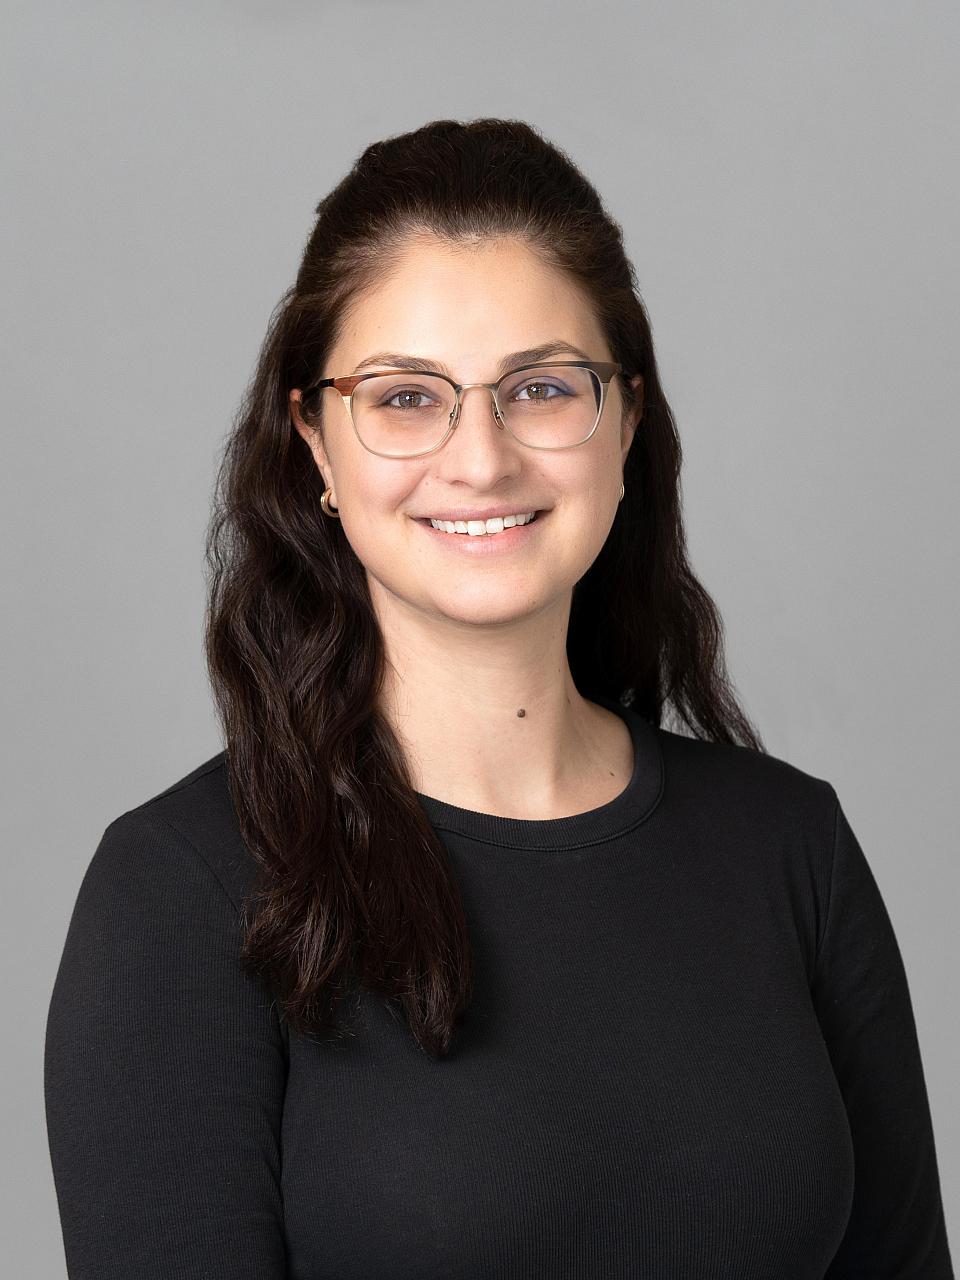 Photo of a woman, Dr. Aleksandra Abrahamowicz, with dark hair and glasses smiling and looking at the camera wearing a black shirt.